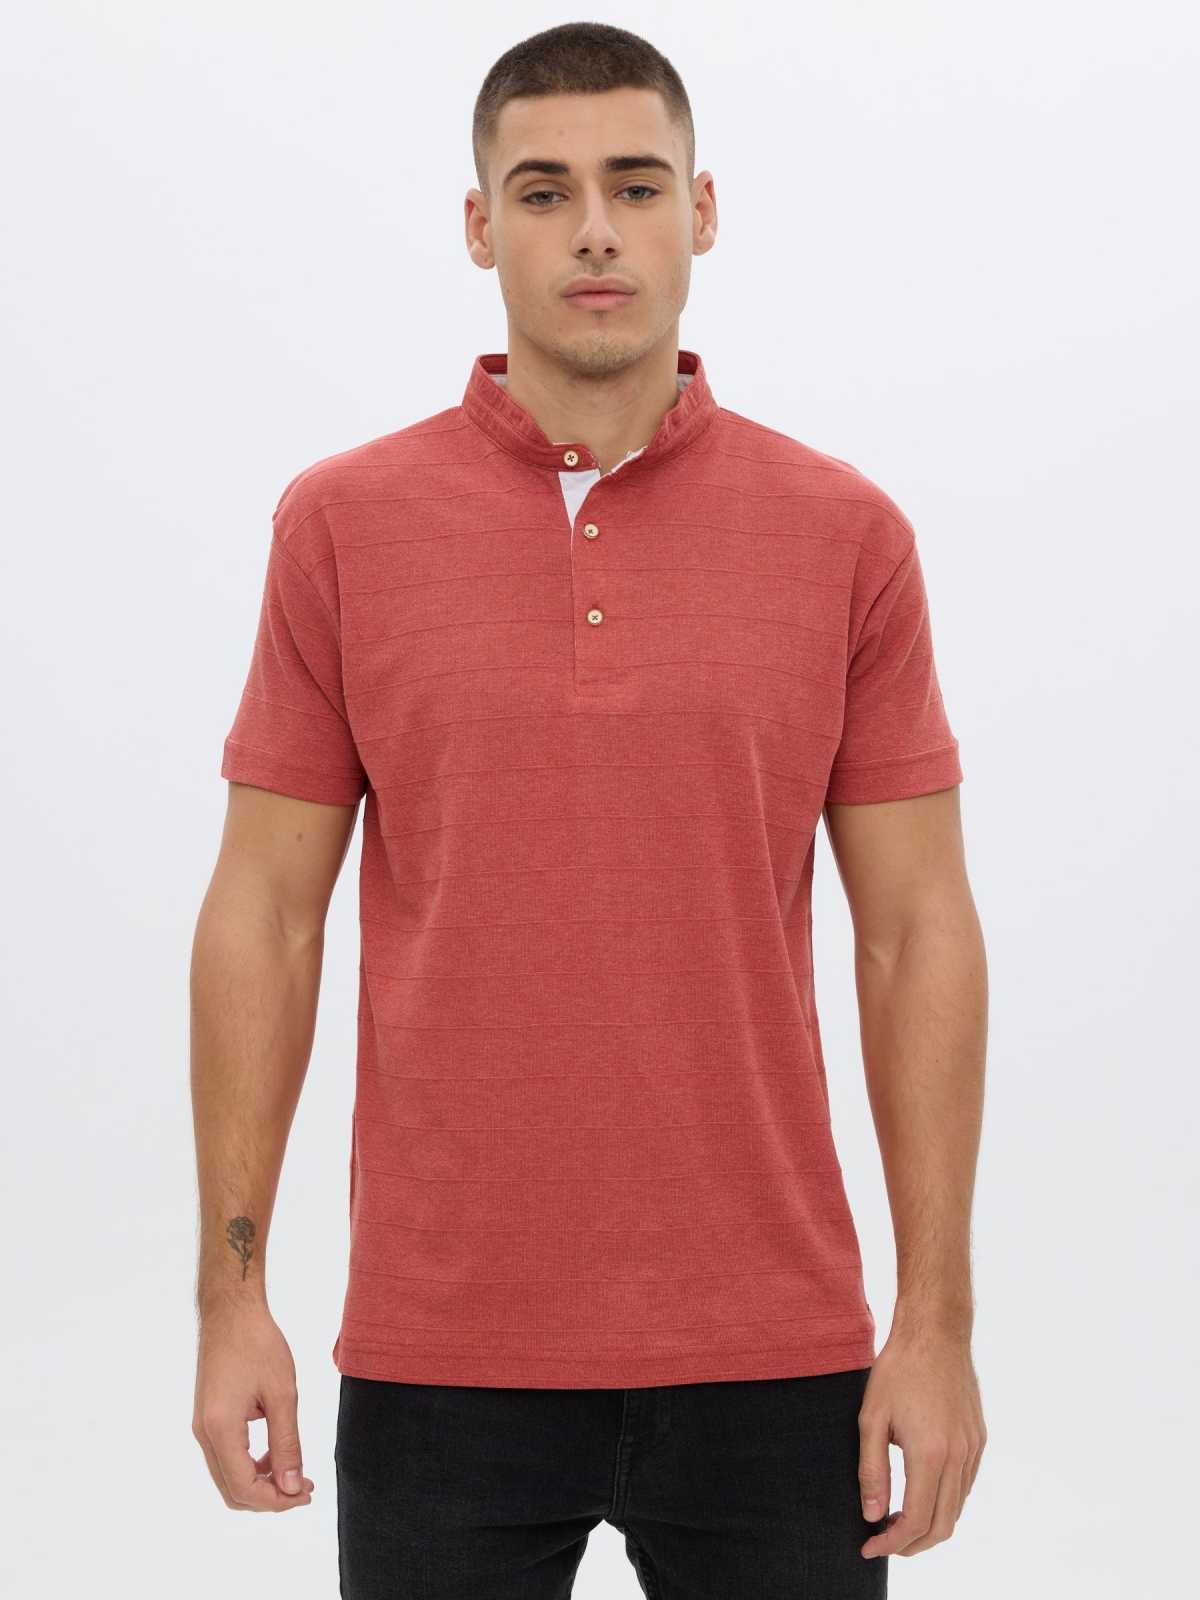 Mao collar textured polo shirt red middle front view